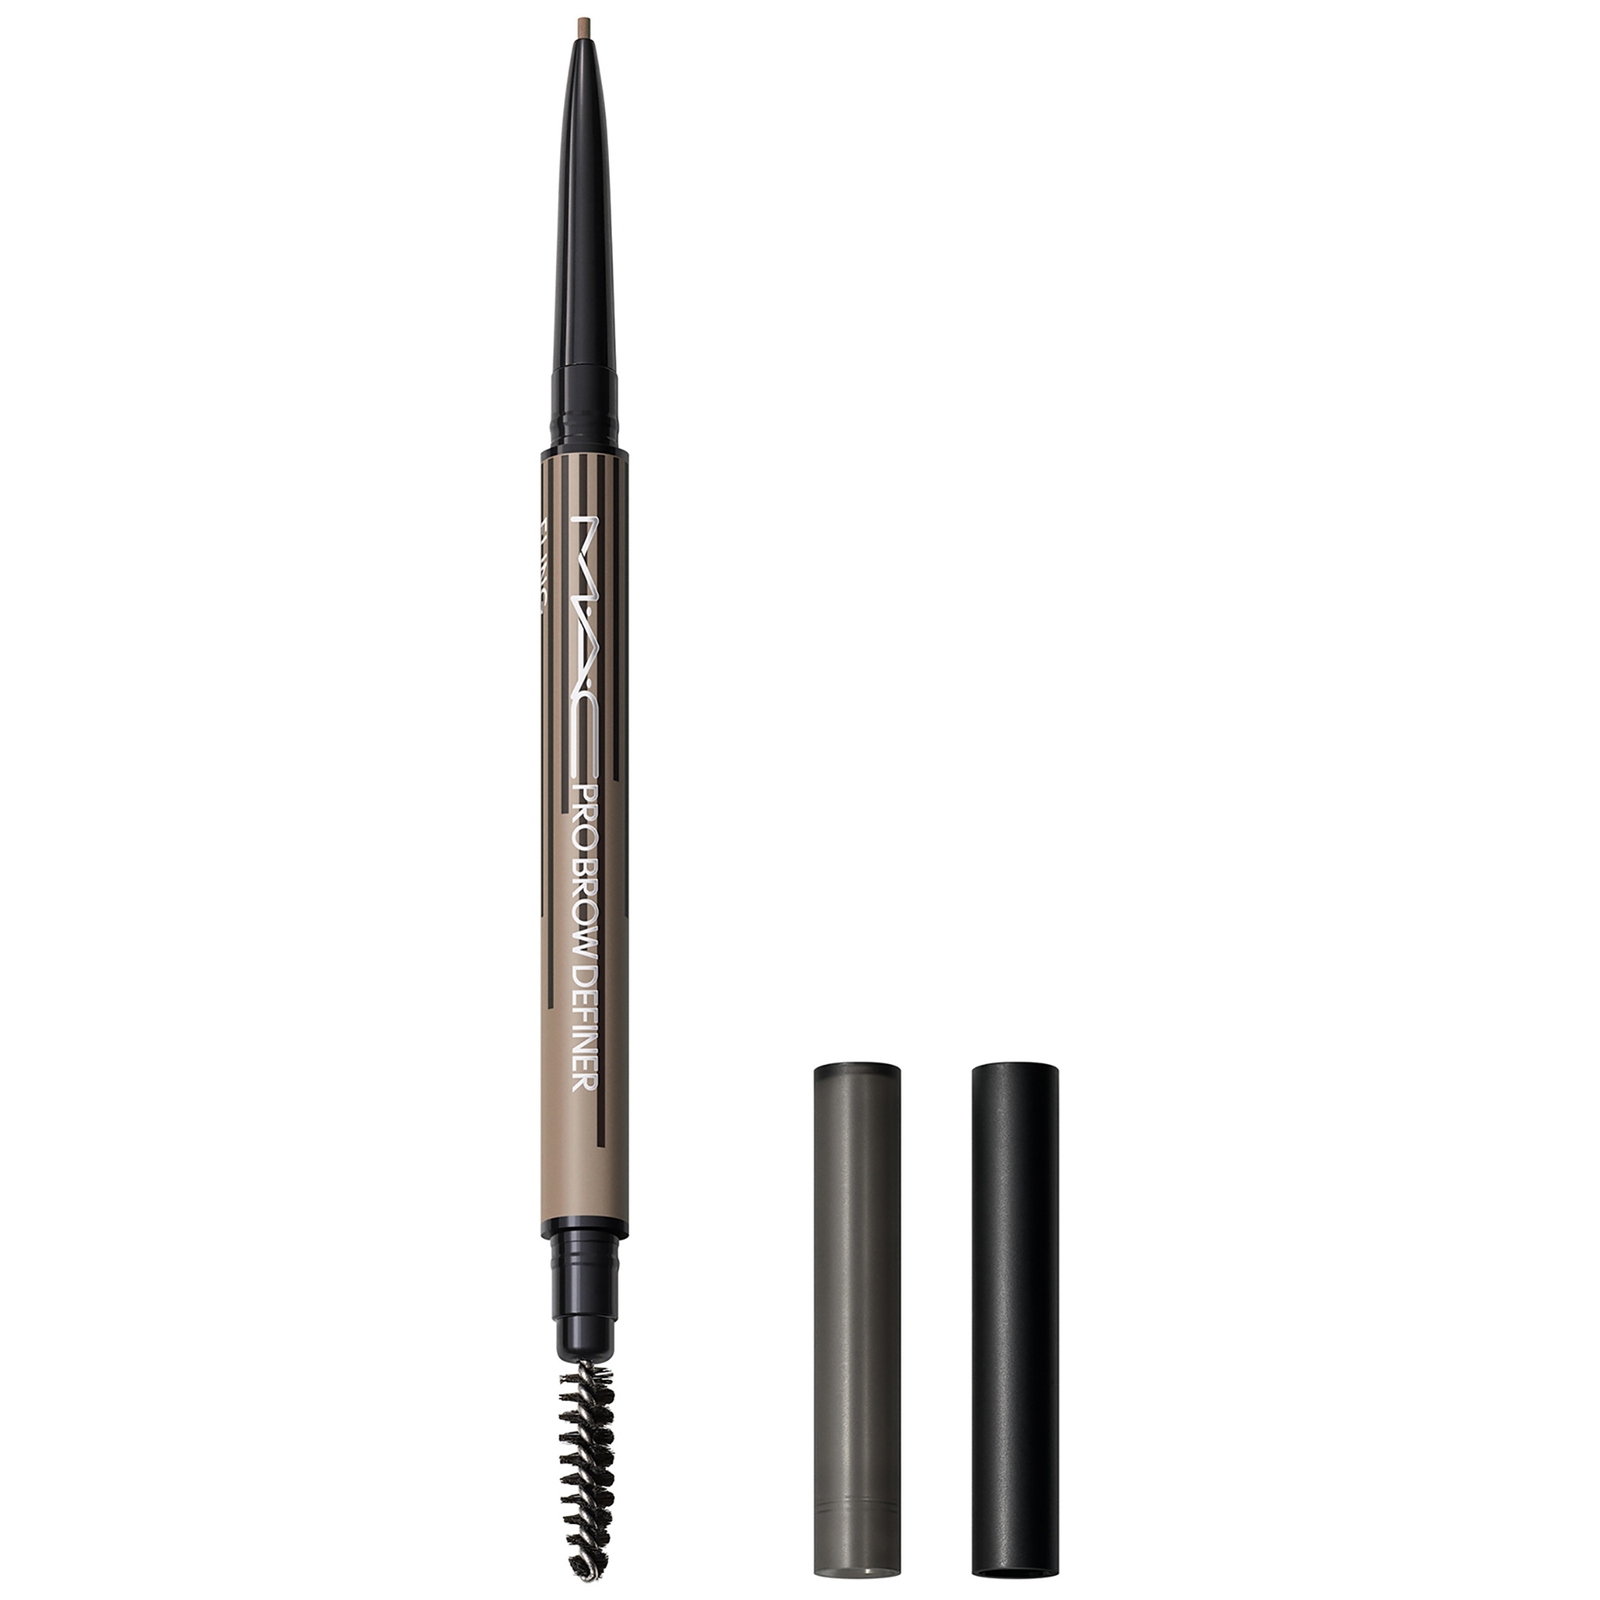 Mac Pro Brow Definer 1mm-tip Brow Pencil 5g (various Shades) - Fling In White